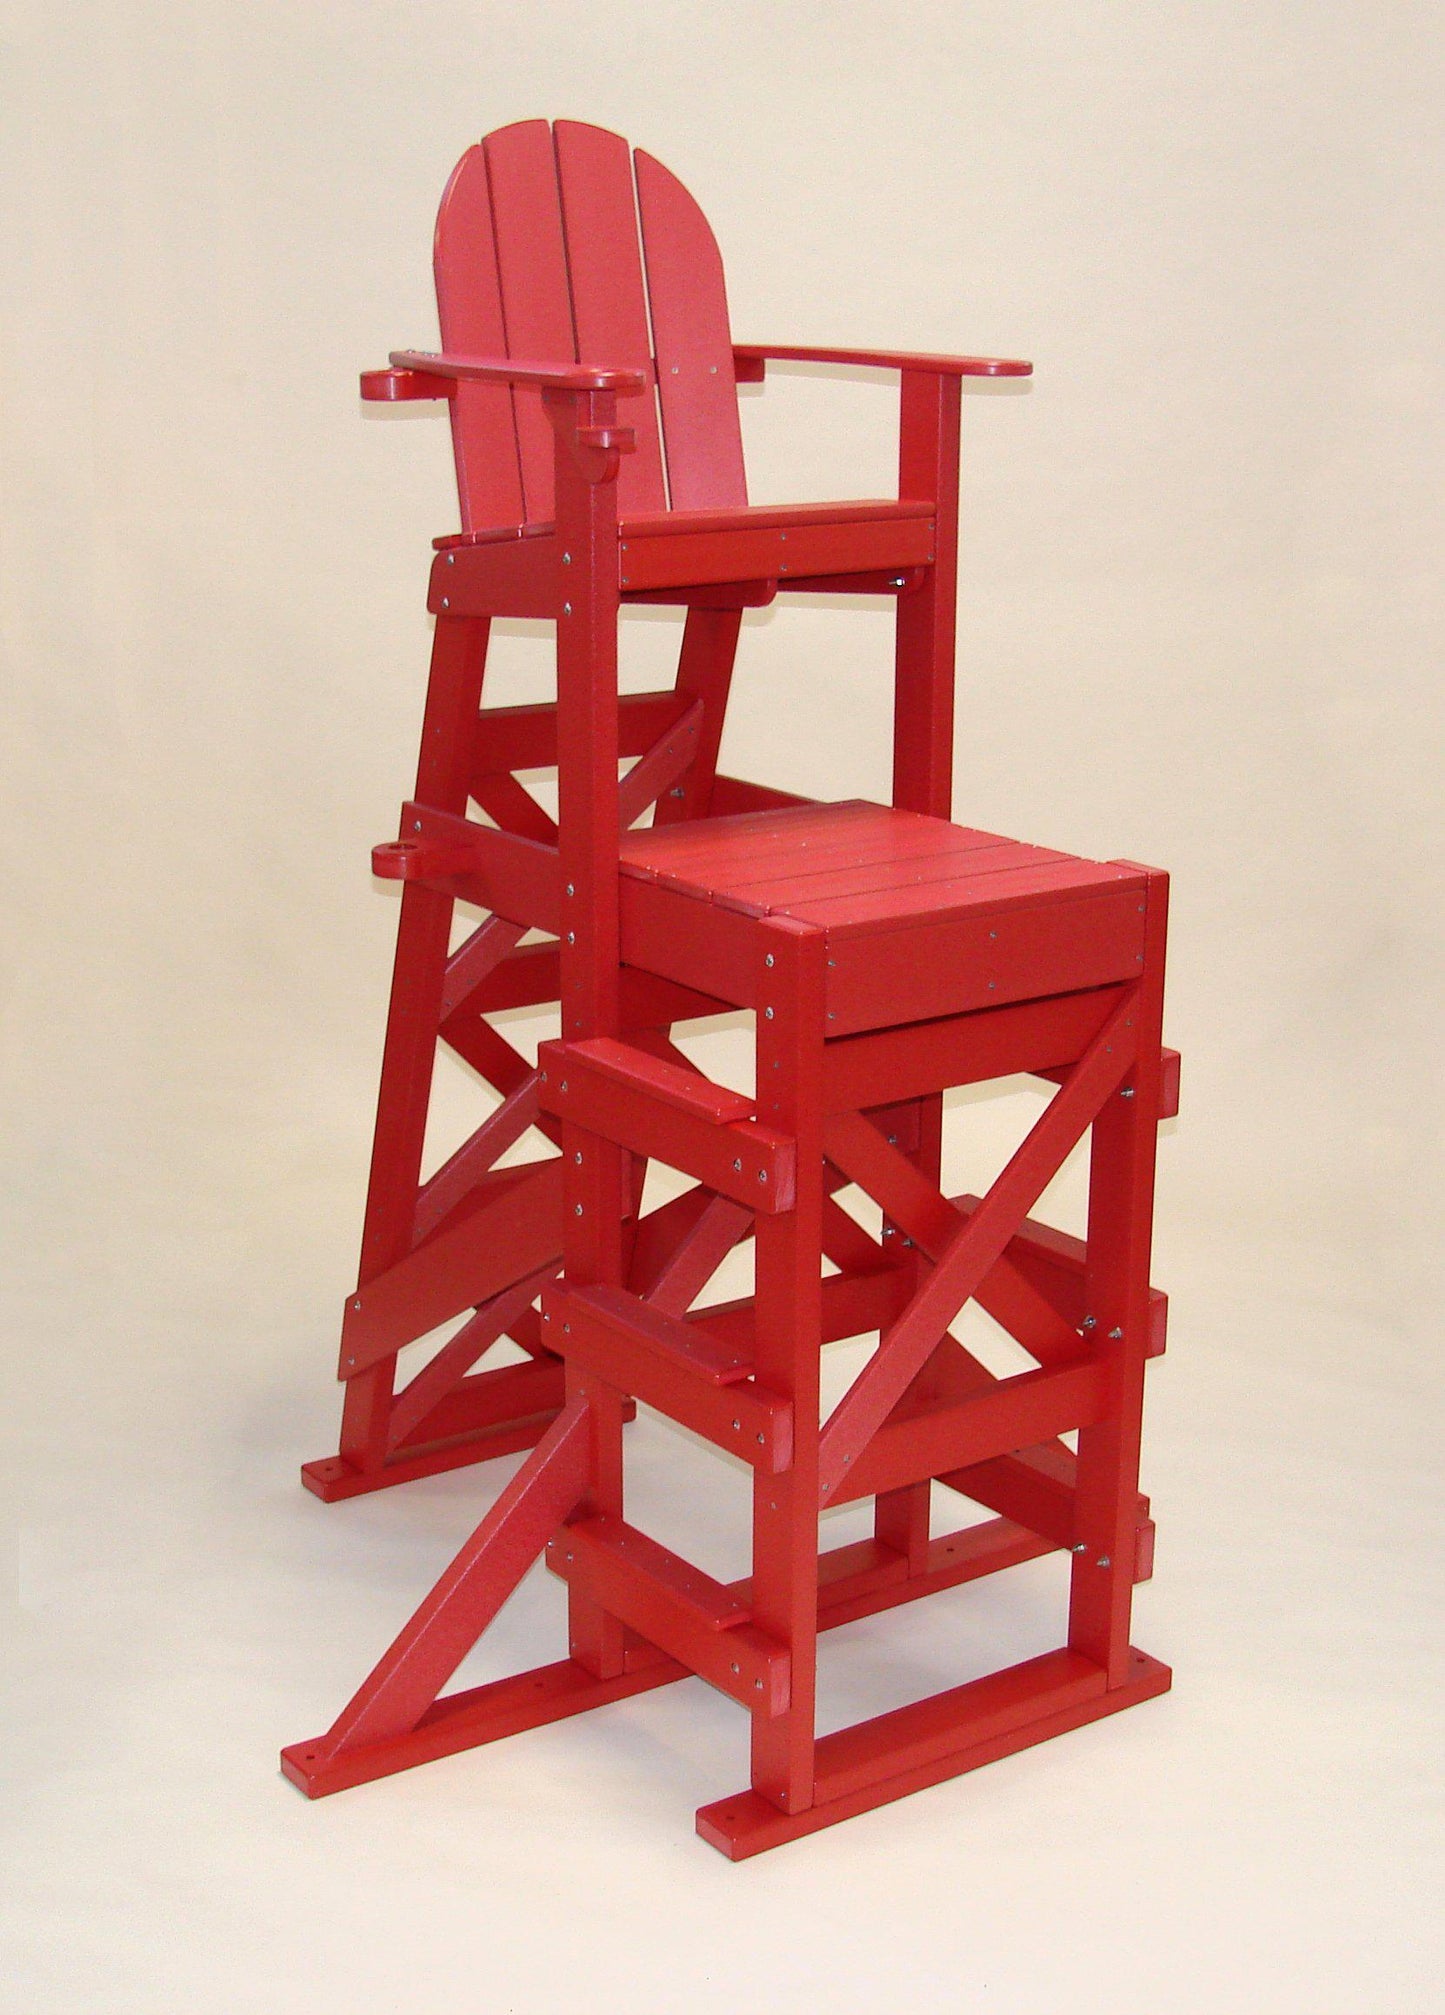 Tailwind Furniture Recycled Plastic TLG-530 Tall Lifeguard Chair with Side Steps - Seat Height: 64" - LEAD TIME TO SHIP 10 TO 12 BUSINESS DAYS